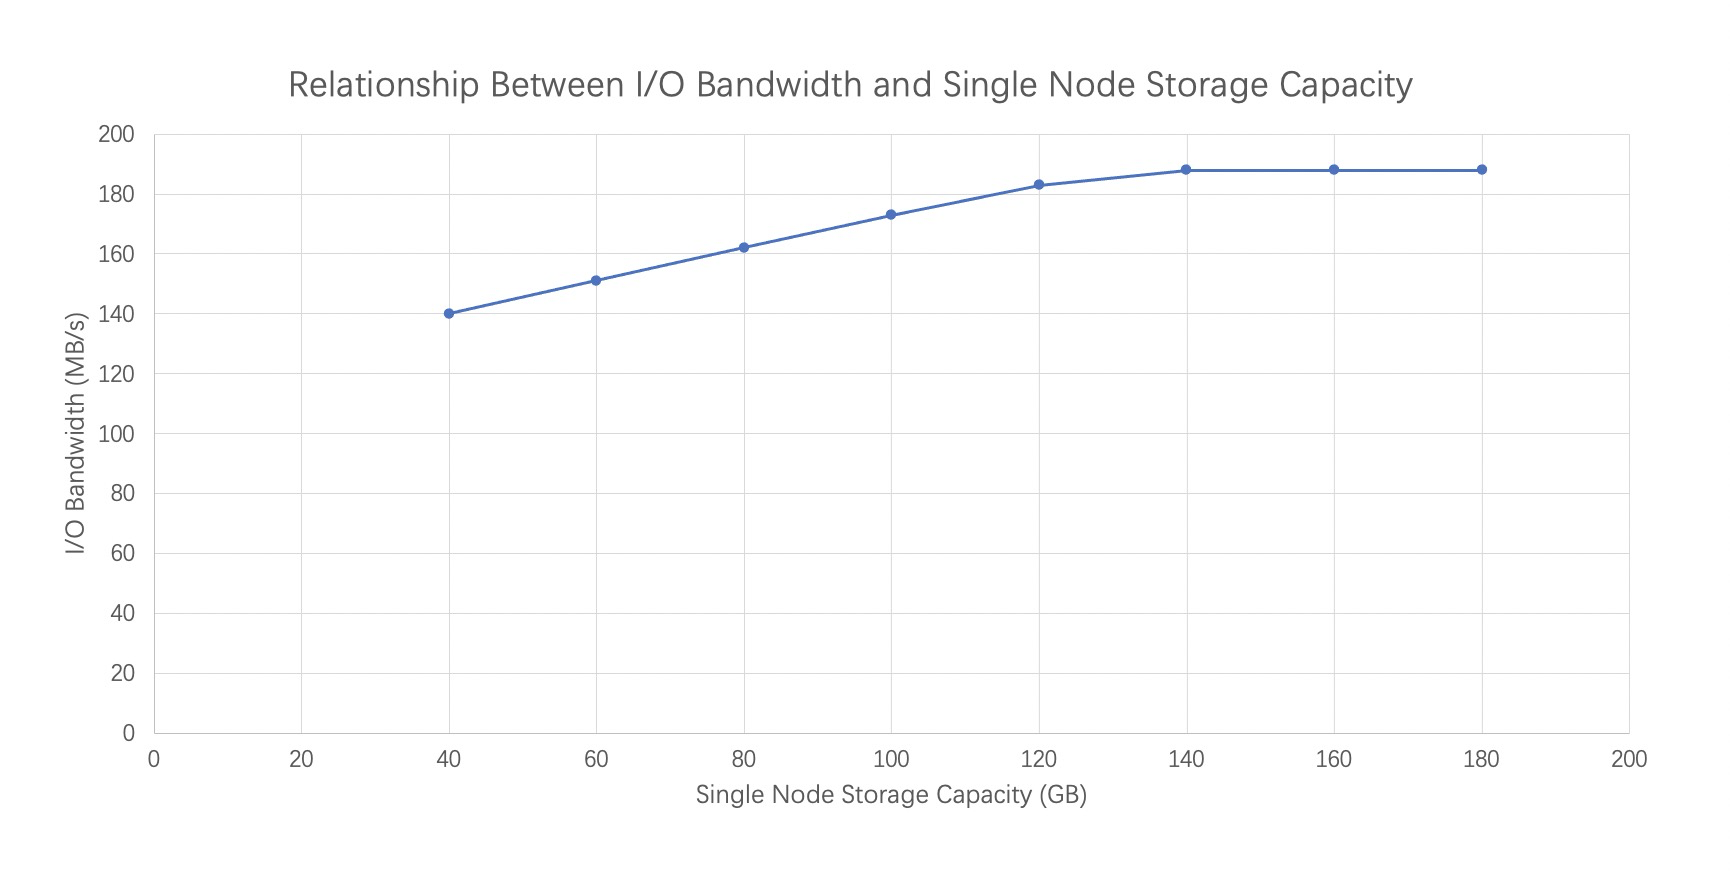 Relationship between storage capacity and I/O performance